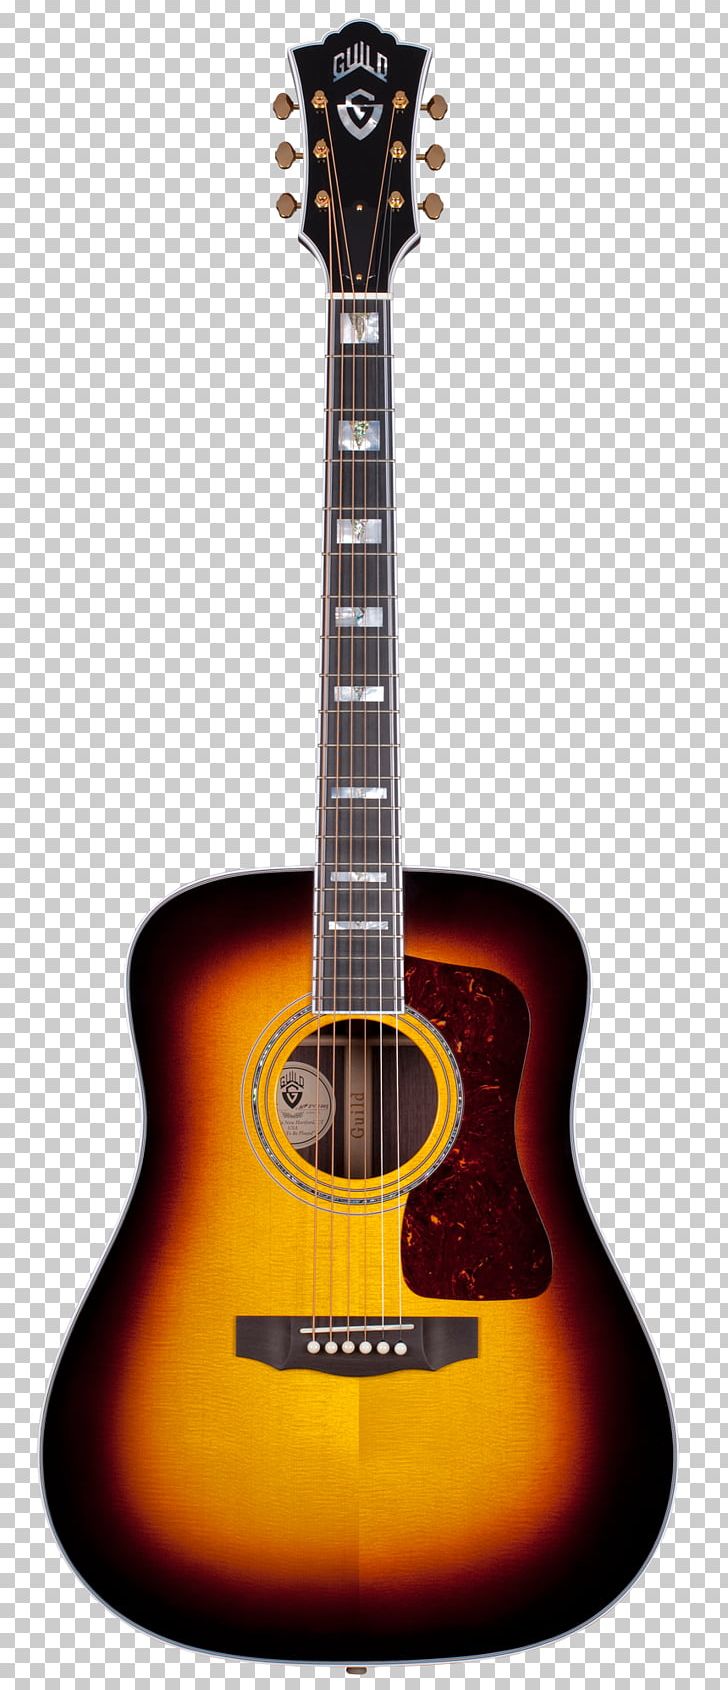 Dreadnought Steel-string Acoustic Guitar Guild D-55 Acoustic Guitar PNG, Clipart, Cuatro, Cutaway, Guitar Accessory, Musical Instrument, Musical Instruments Free PNG Download